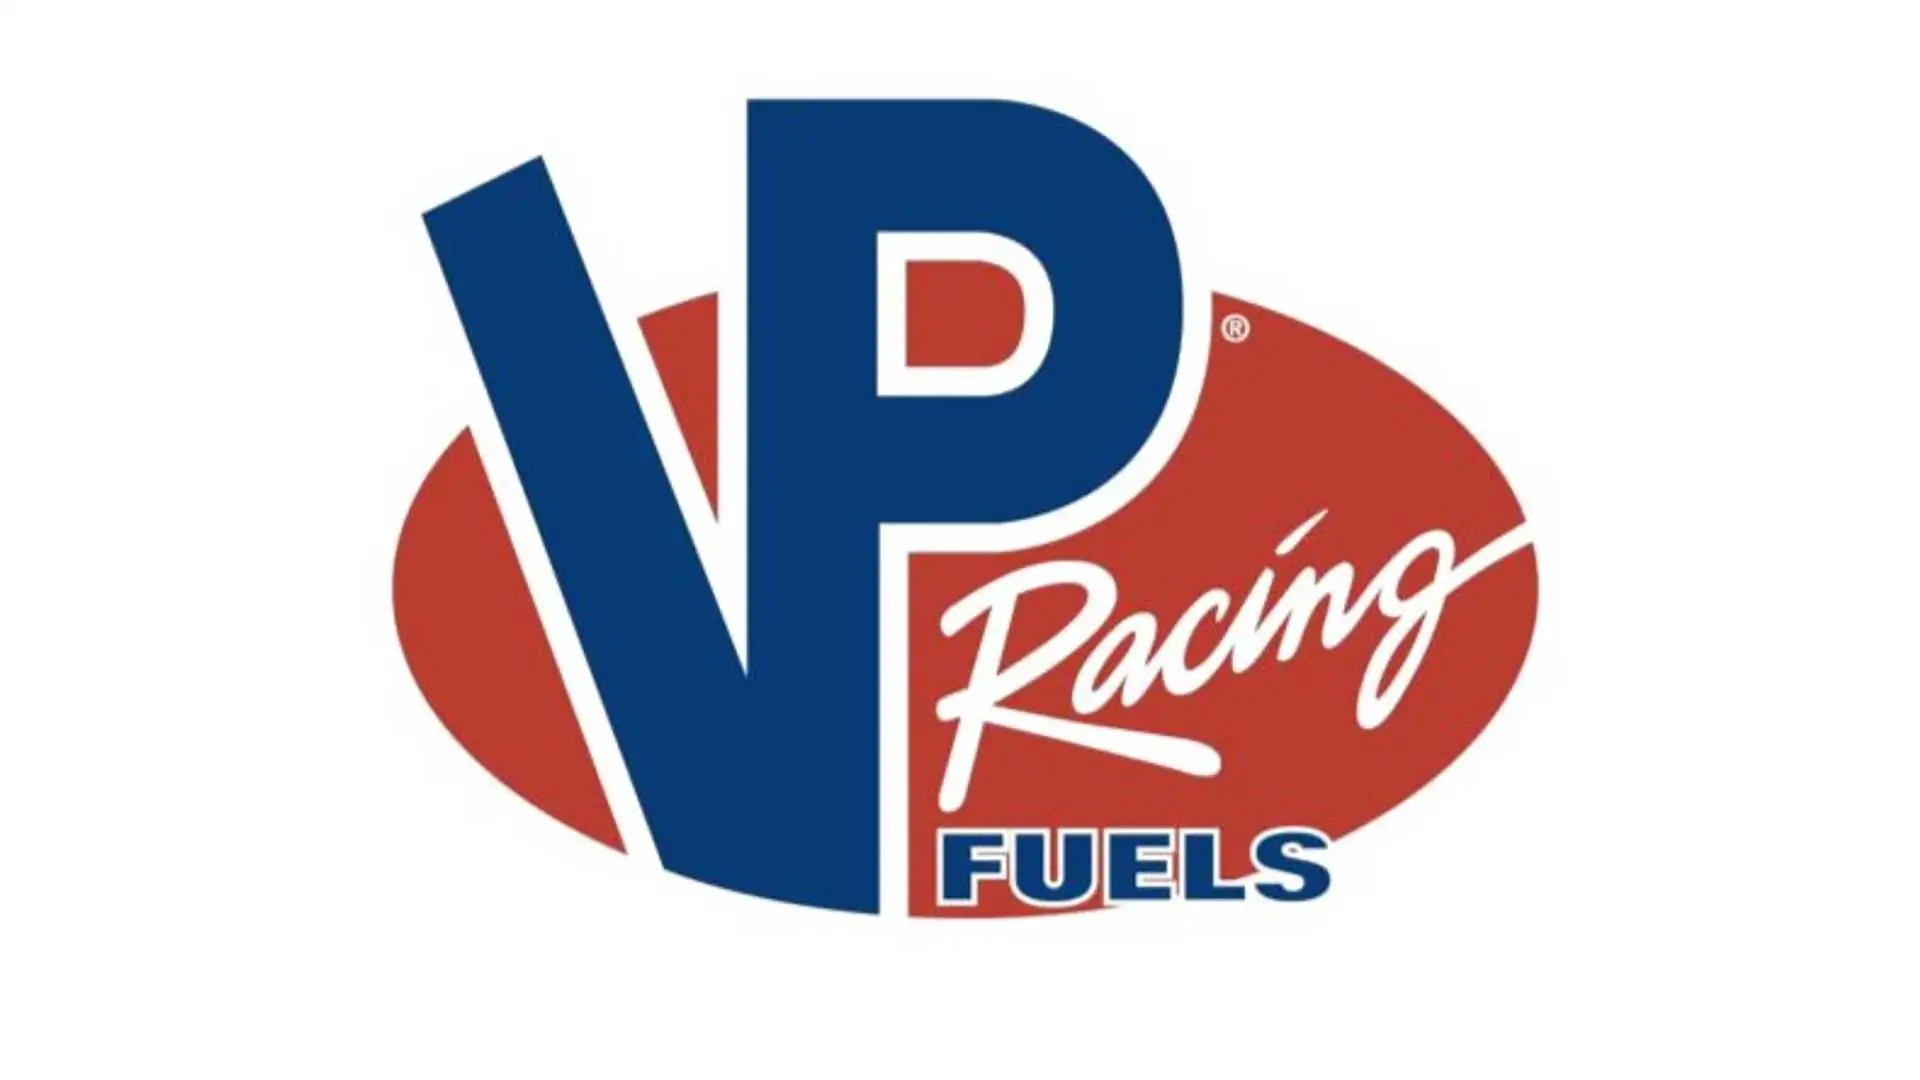 A view of the logo connected to VR Racing Fuels